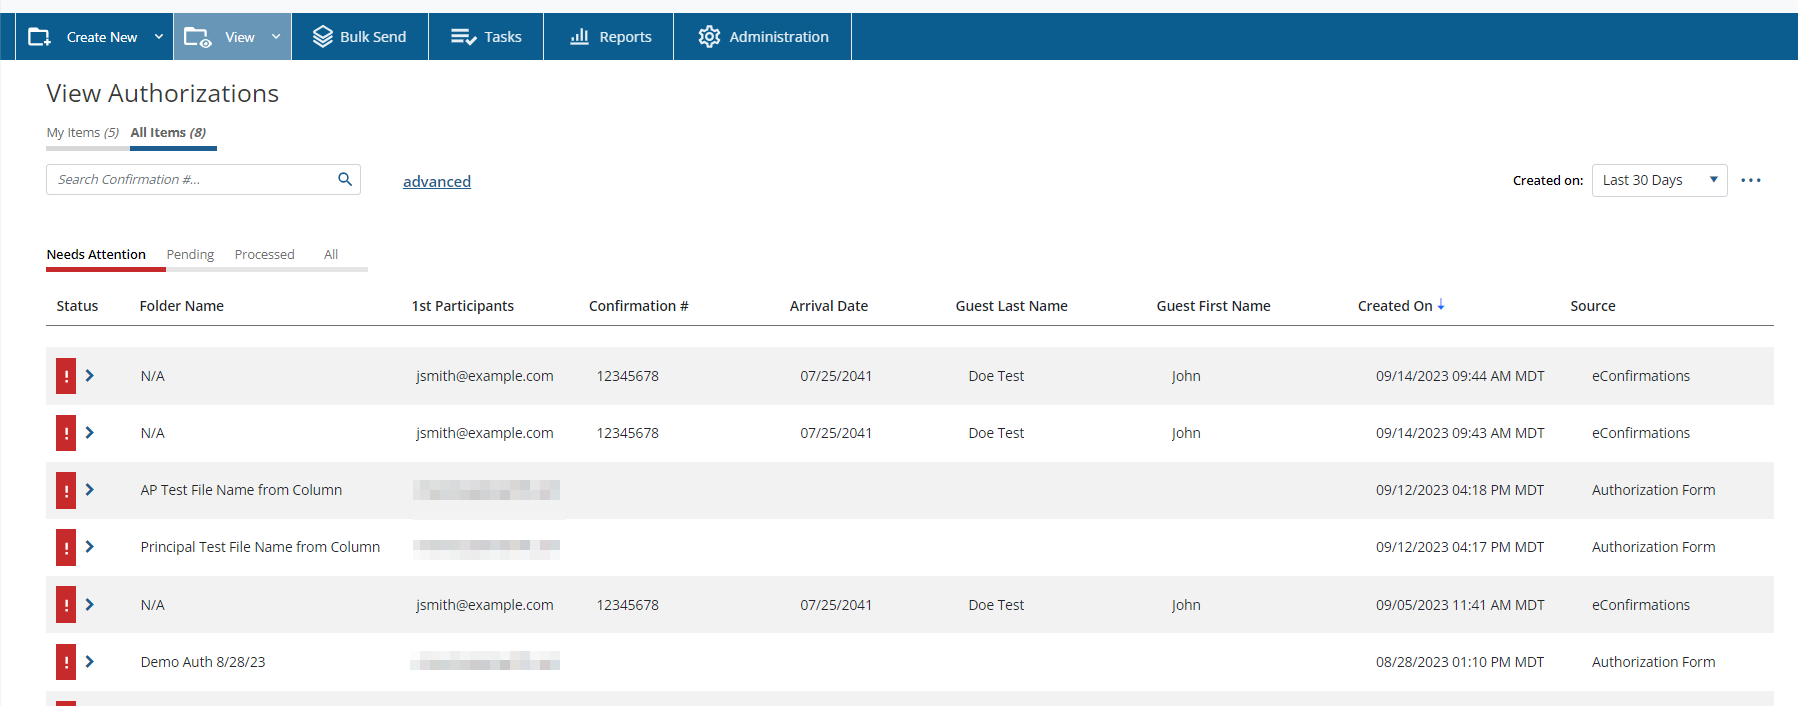 The View Authorizations page, listing eConfirmations as a source.